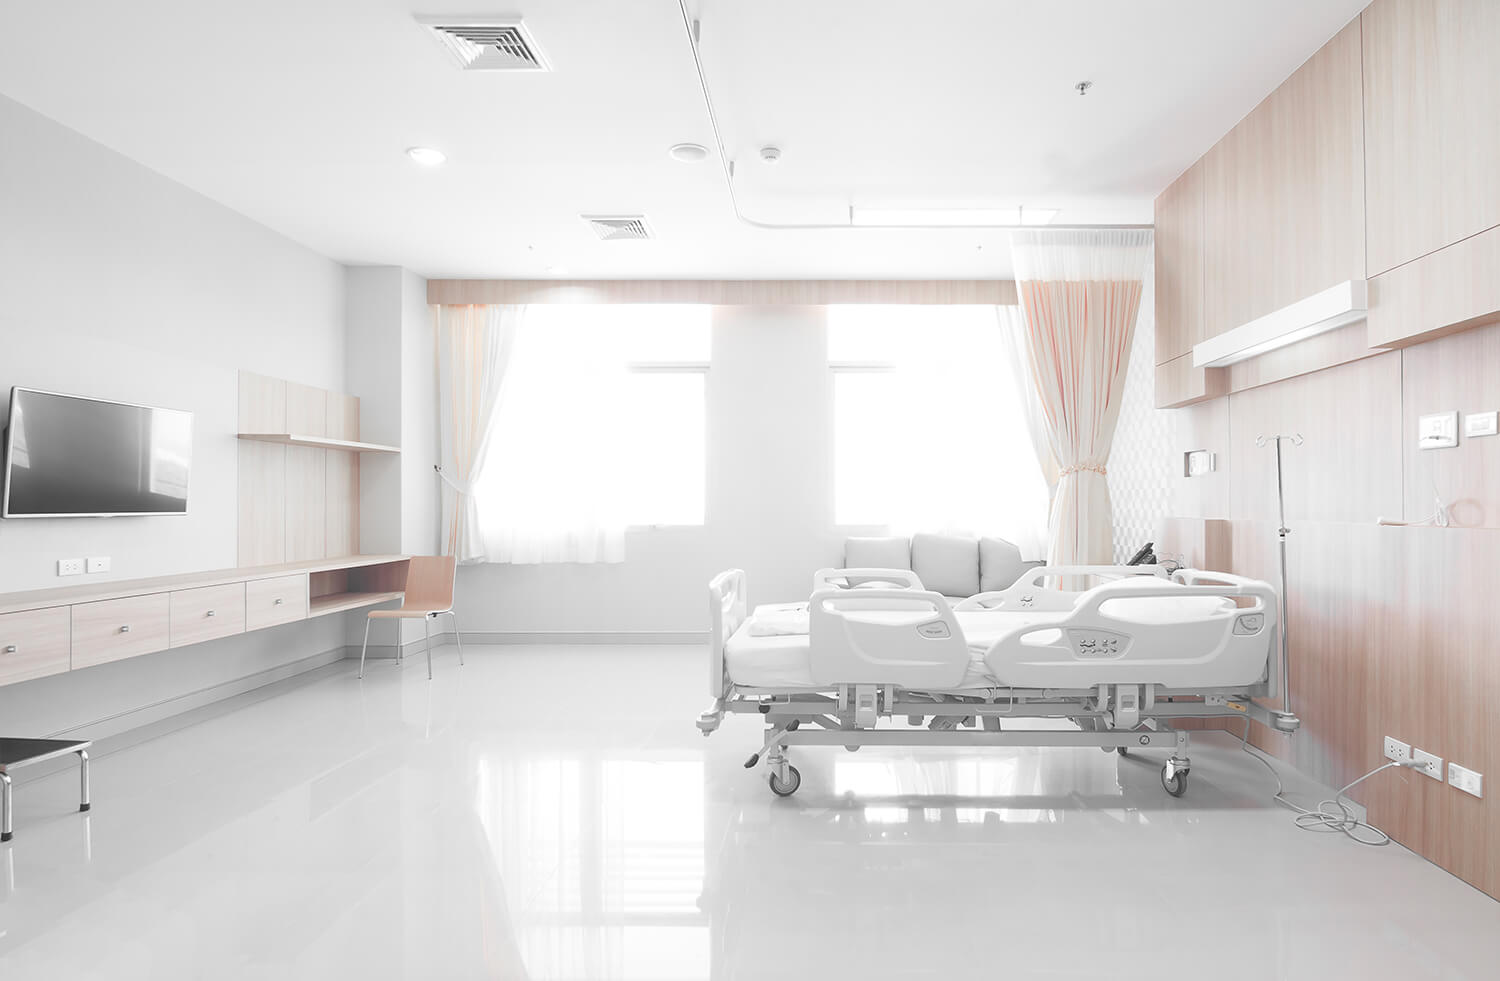 industries for security systems - Hospitals